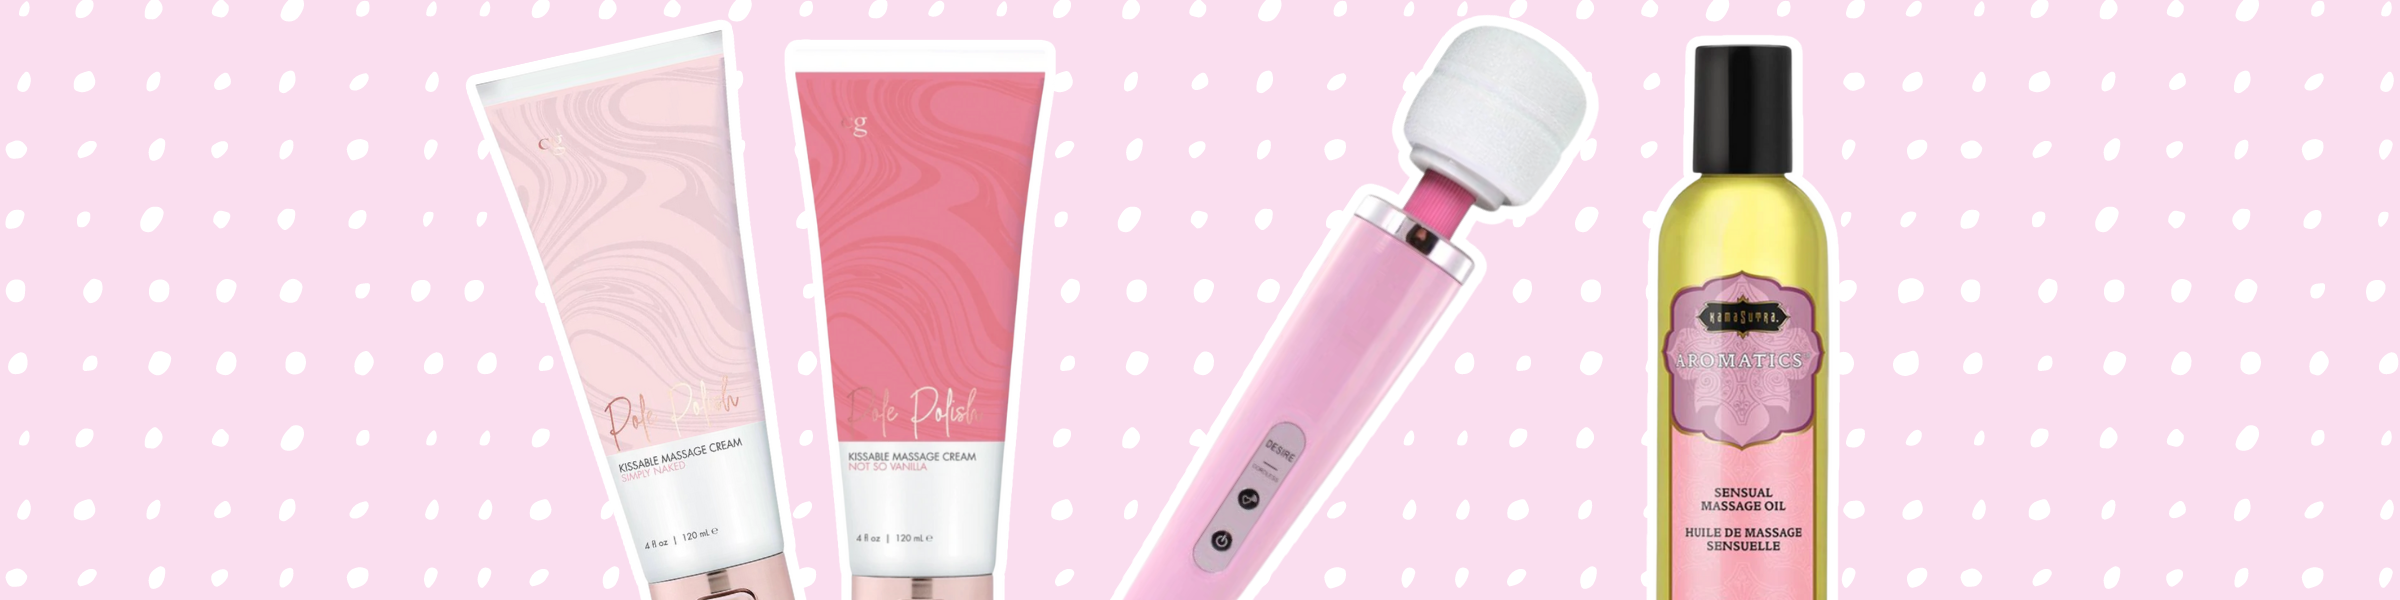 Image of our best-selling relaxation and intimacy products on a pink background with polka dots. The products featured include Pole Polish massage cream, best-selling body wand massager, and massage oil.